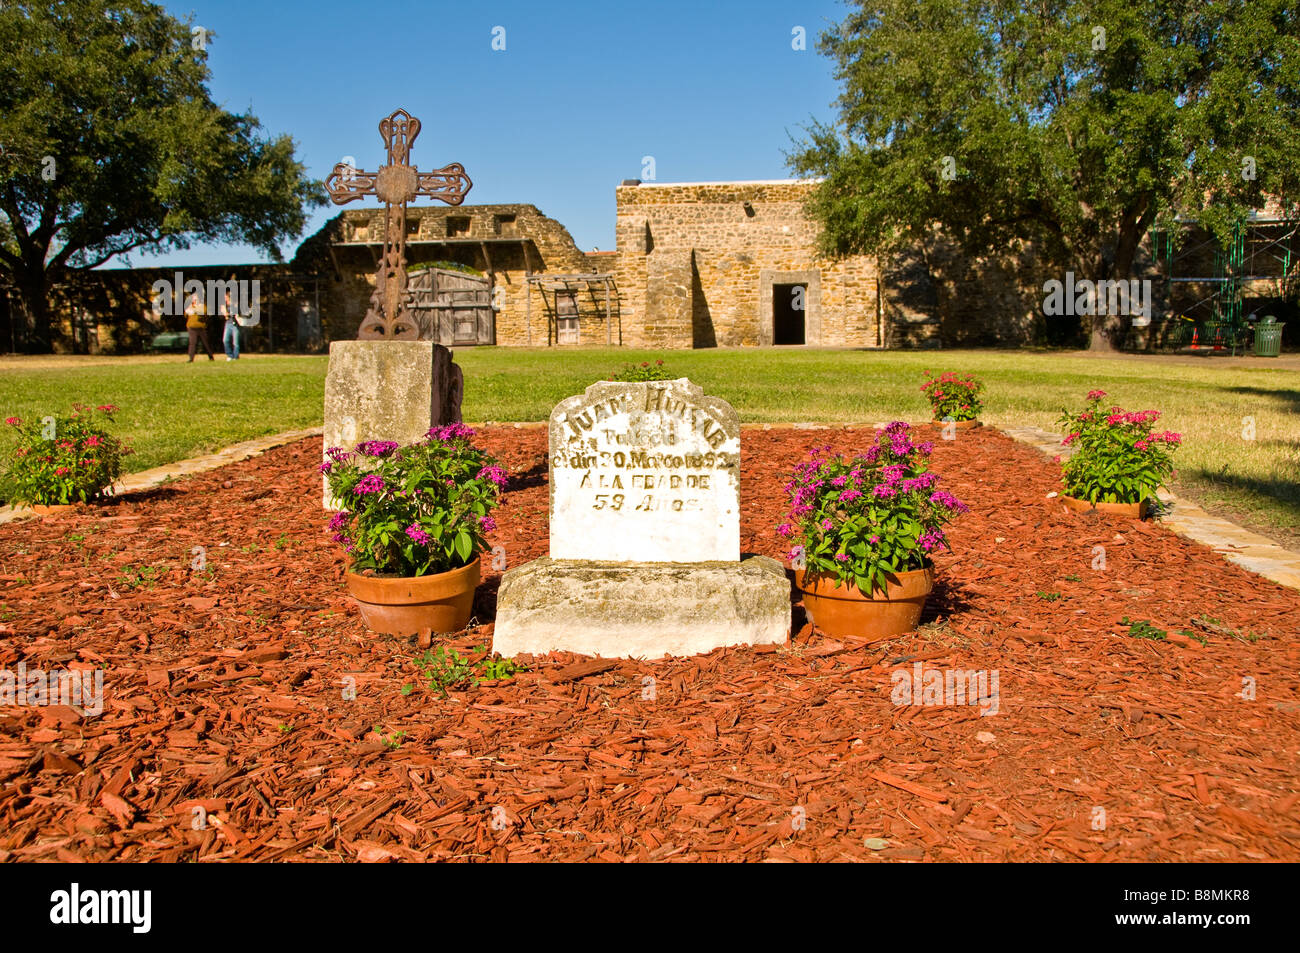 Mission Concepcion San Antonio Texas tx missions national historical park marker sign Stock Photo